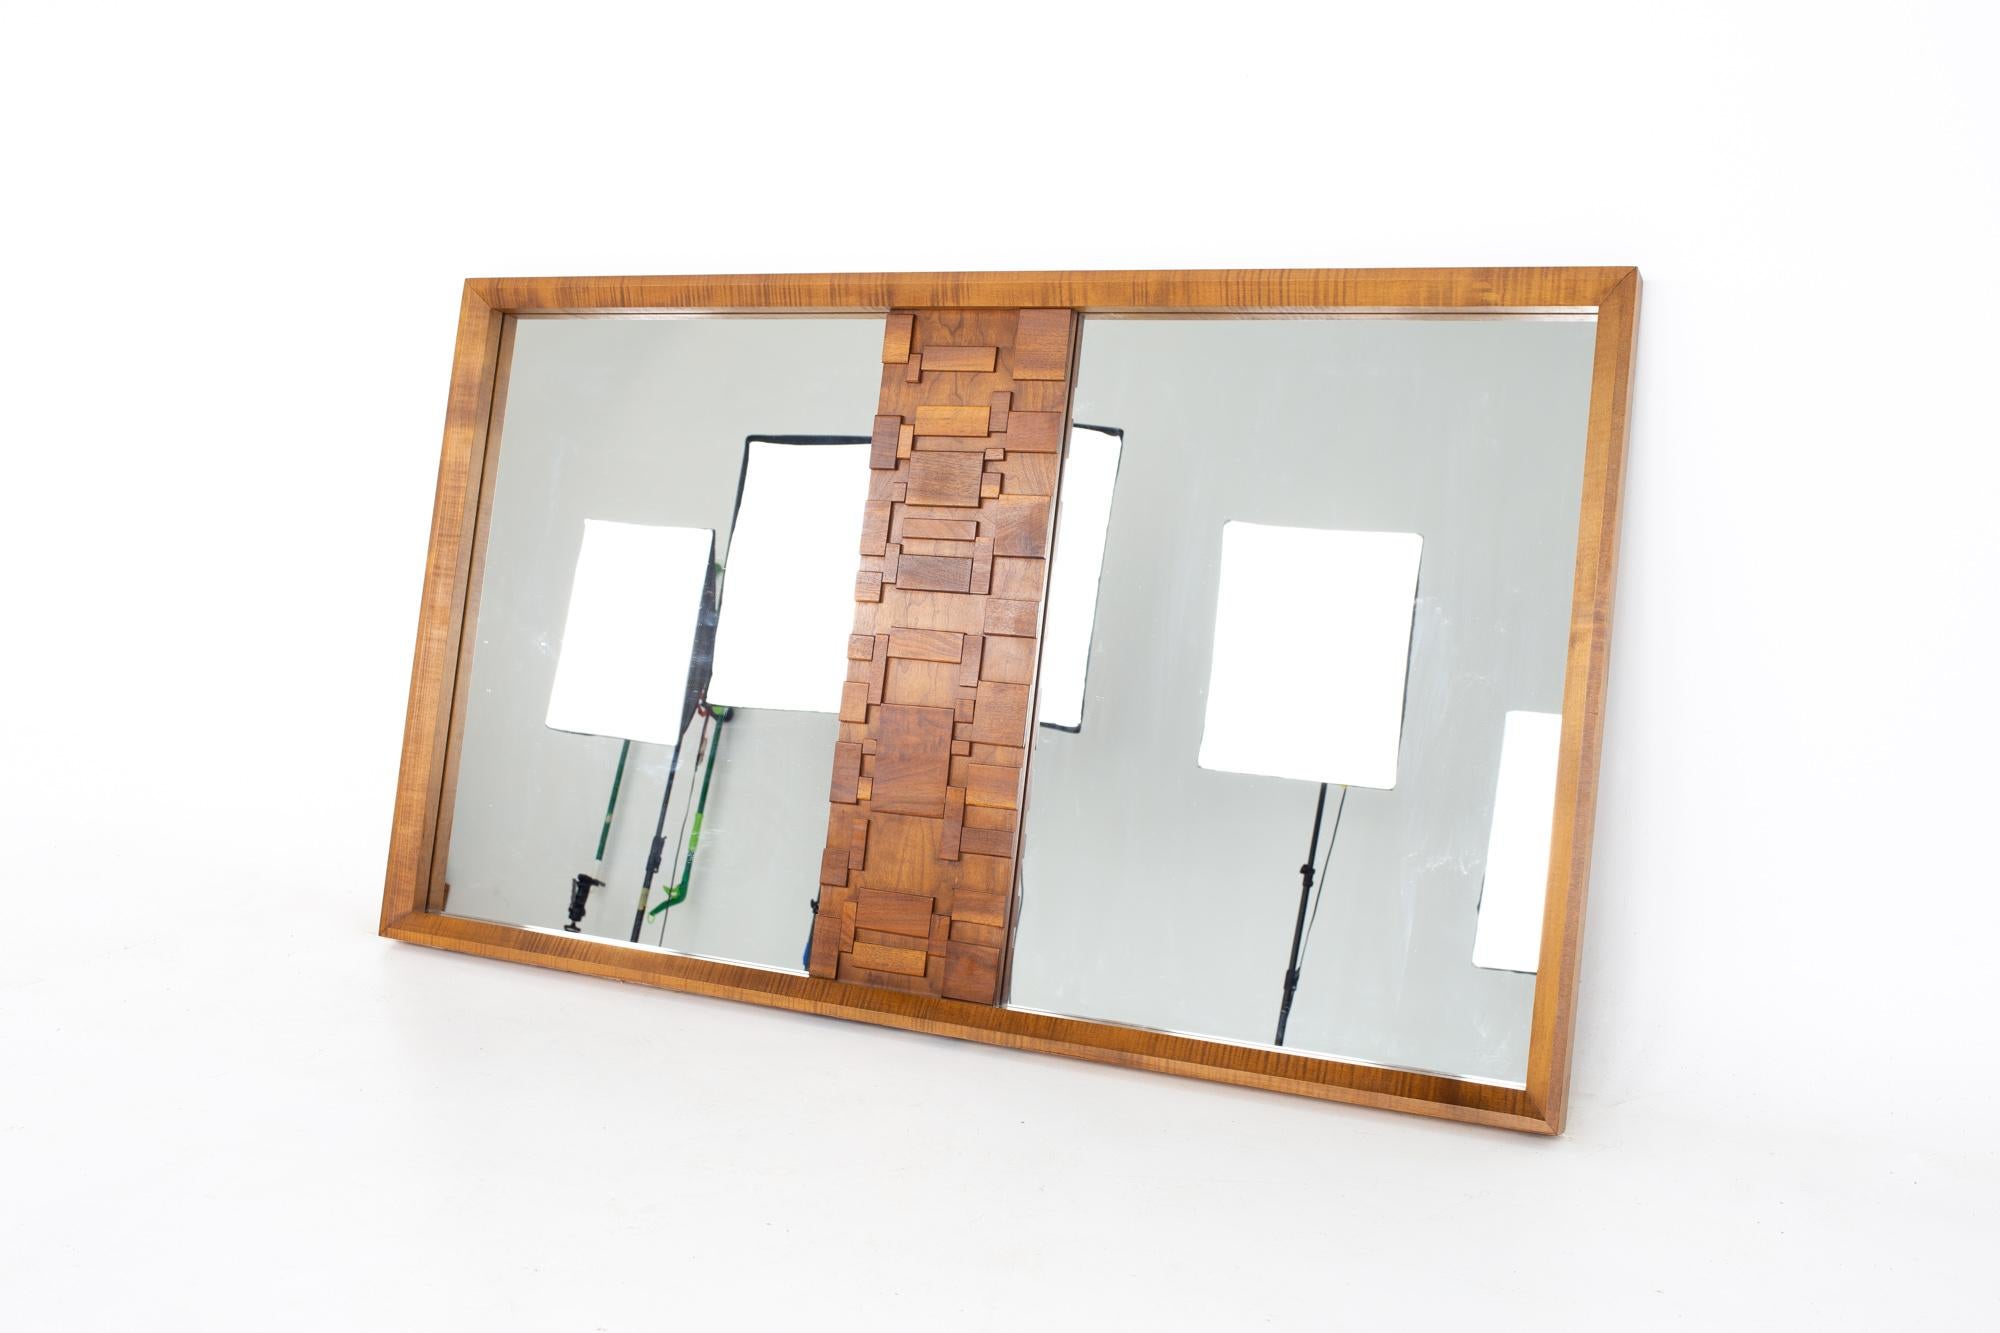 Paul Evans style Lane Brutalist mid century walnut mirror
Mirror measures: 62.5 wide x 2 deep x 36.5 inches high

All pieces of furniture can be had in what we call restored vintage condition. That means the piece is restored upon purchase so